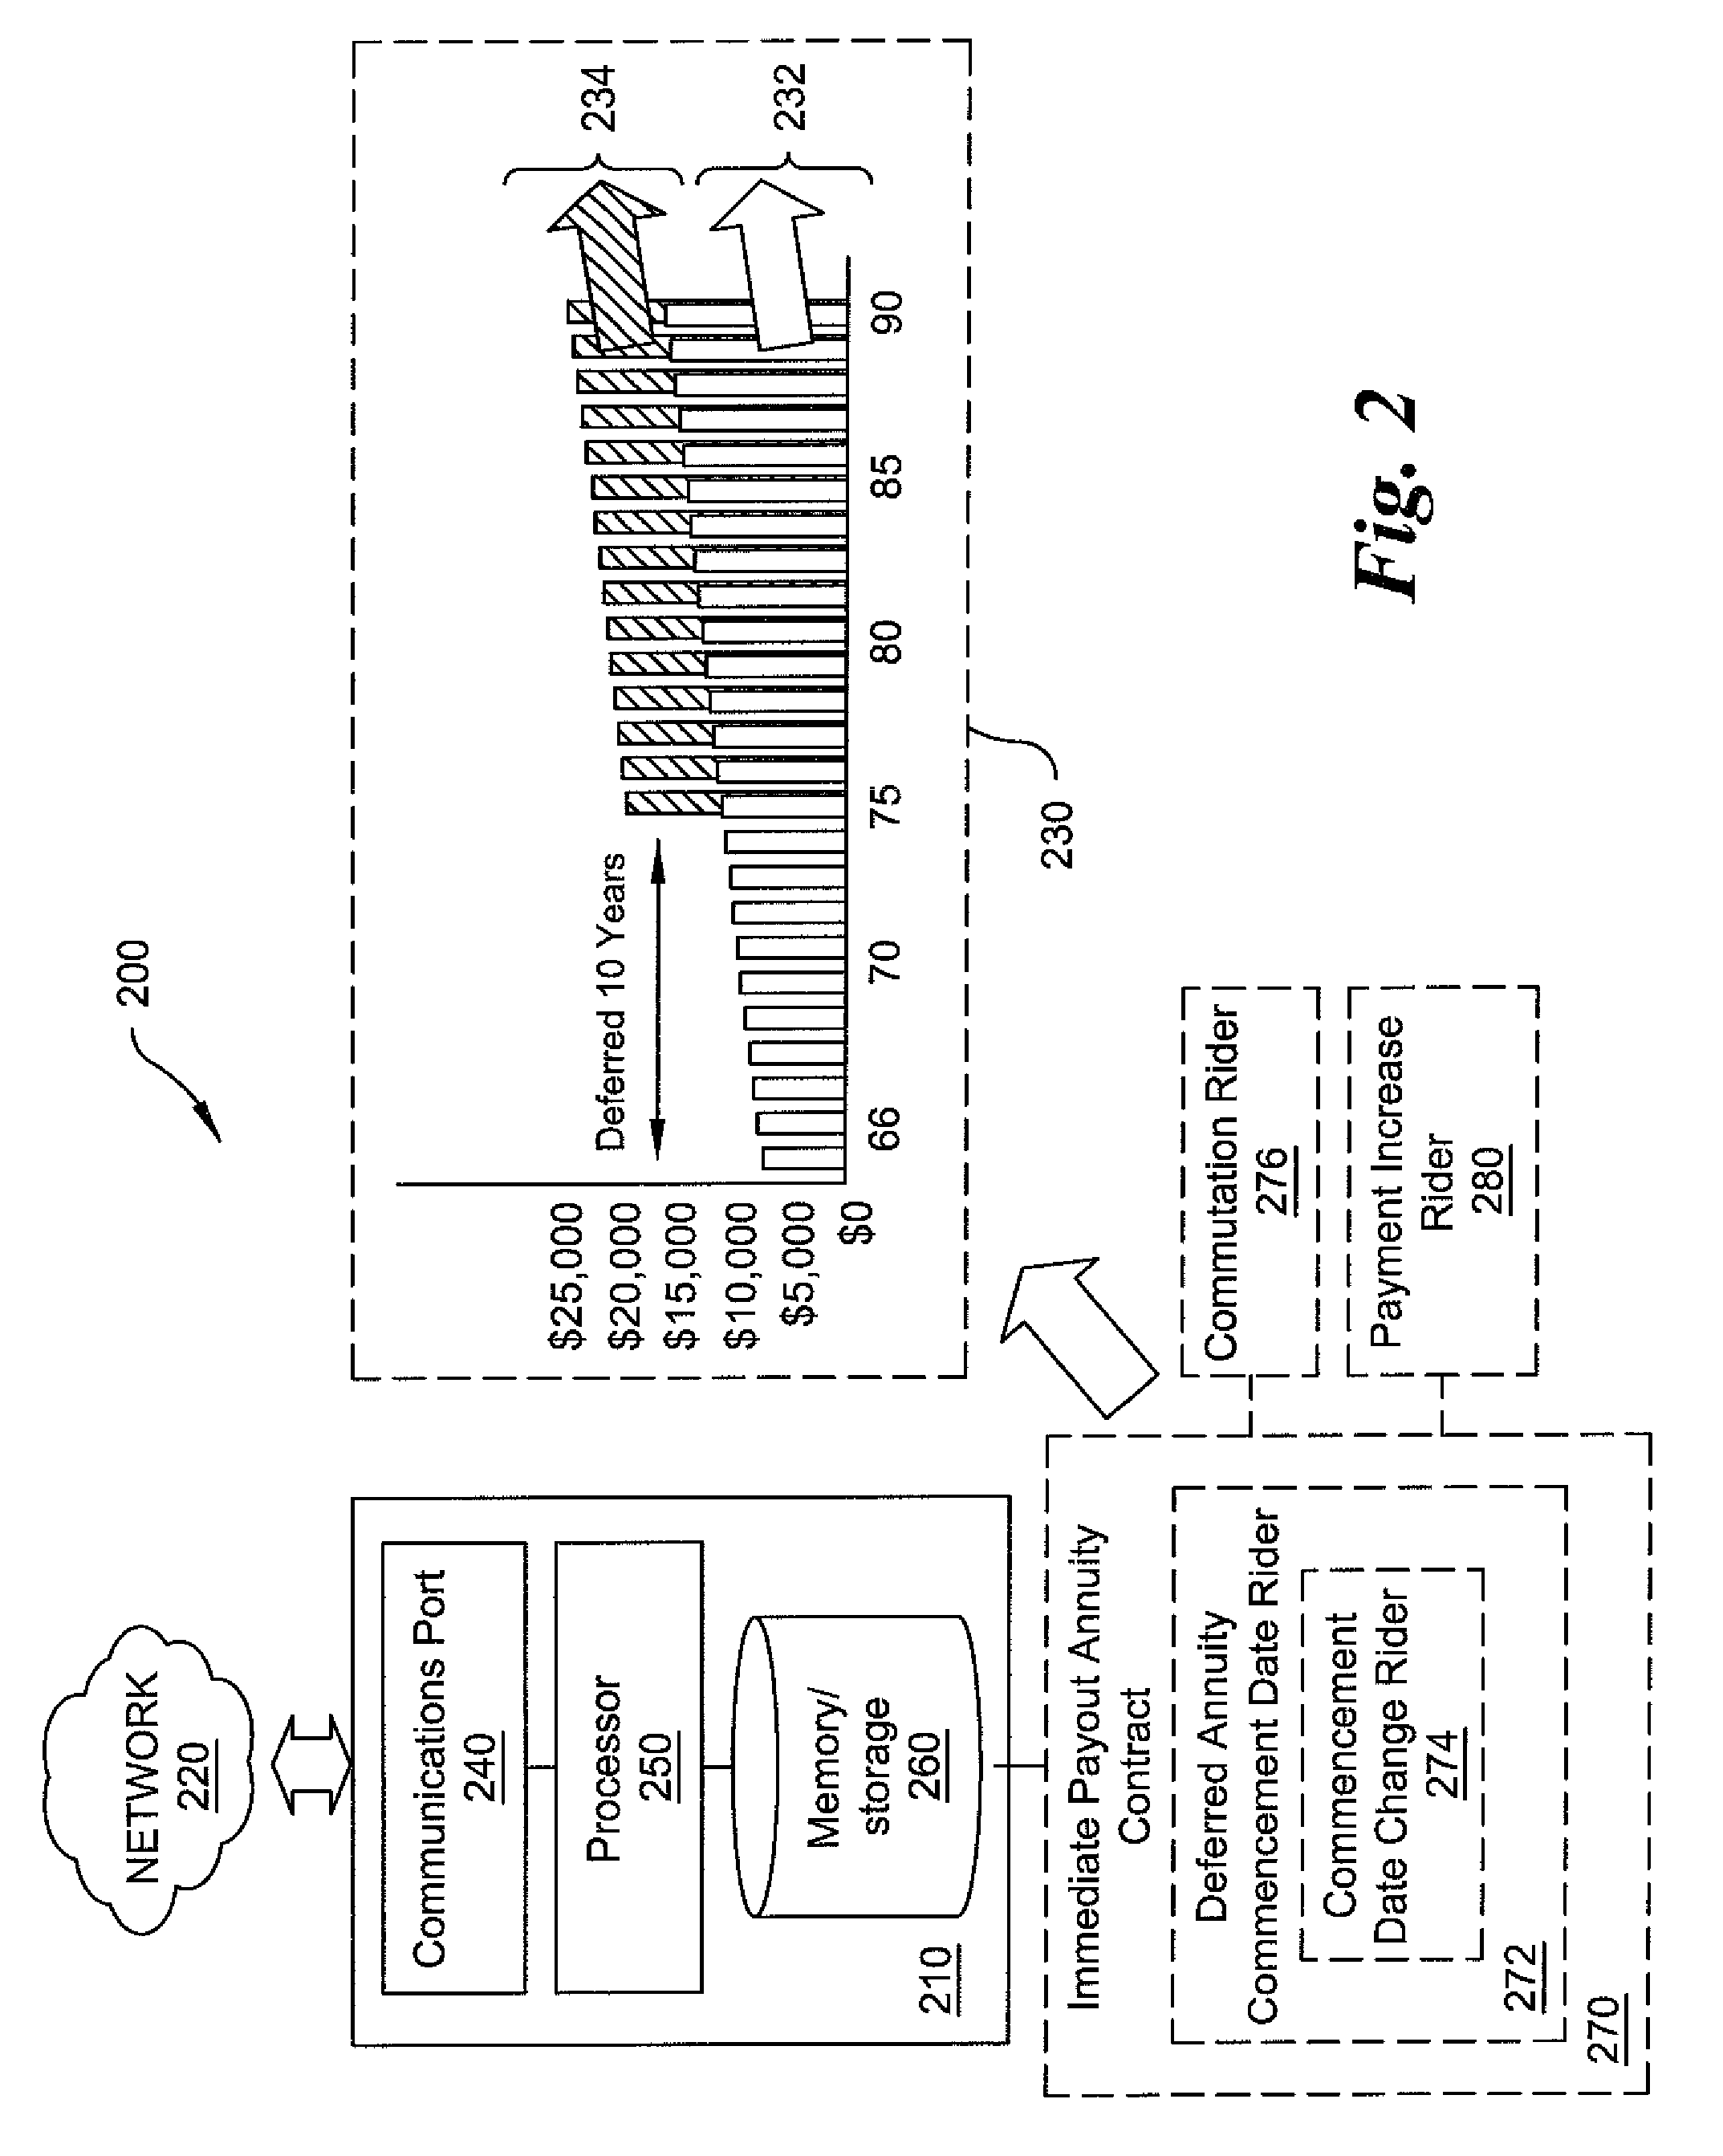 System and method for processing and administering flexible guaranteed income payments